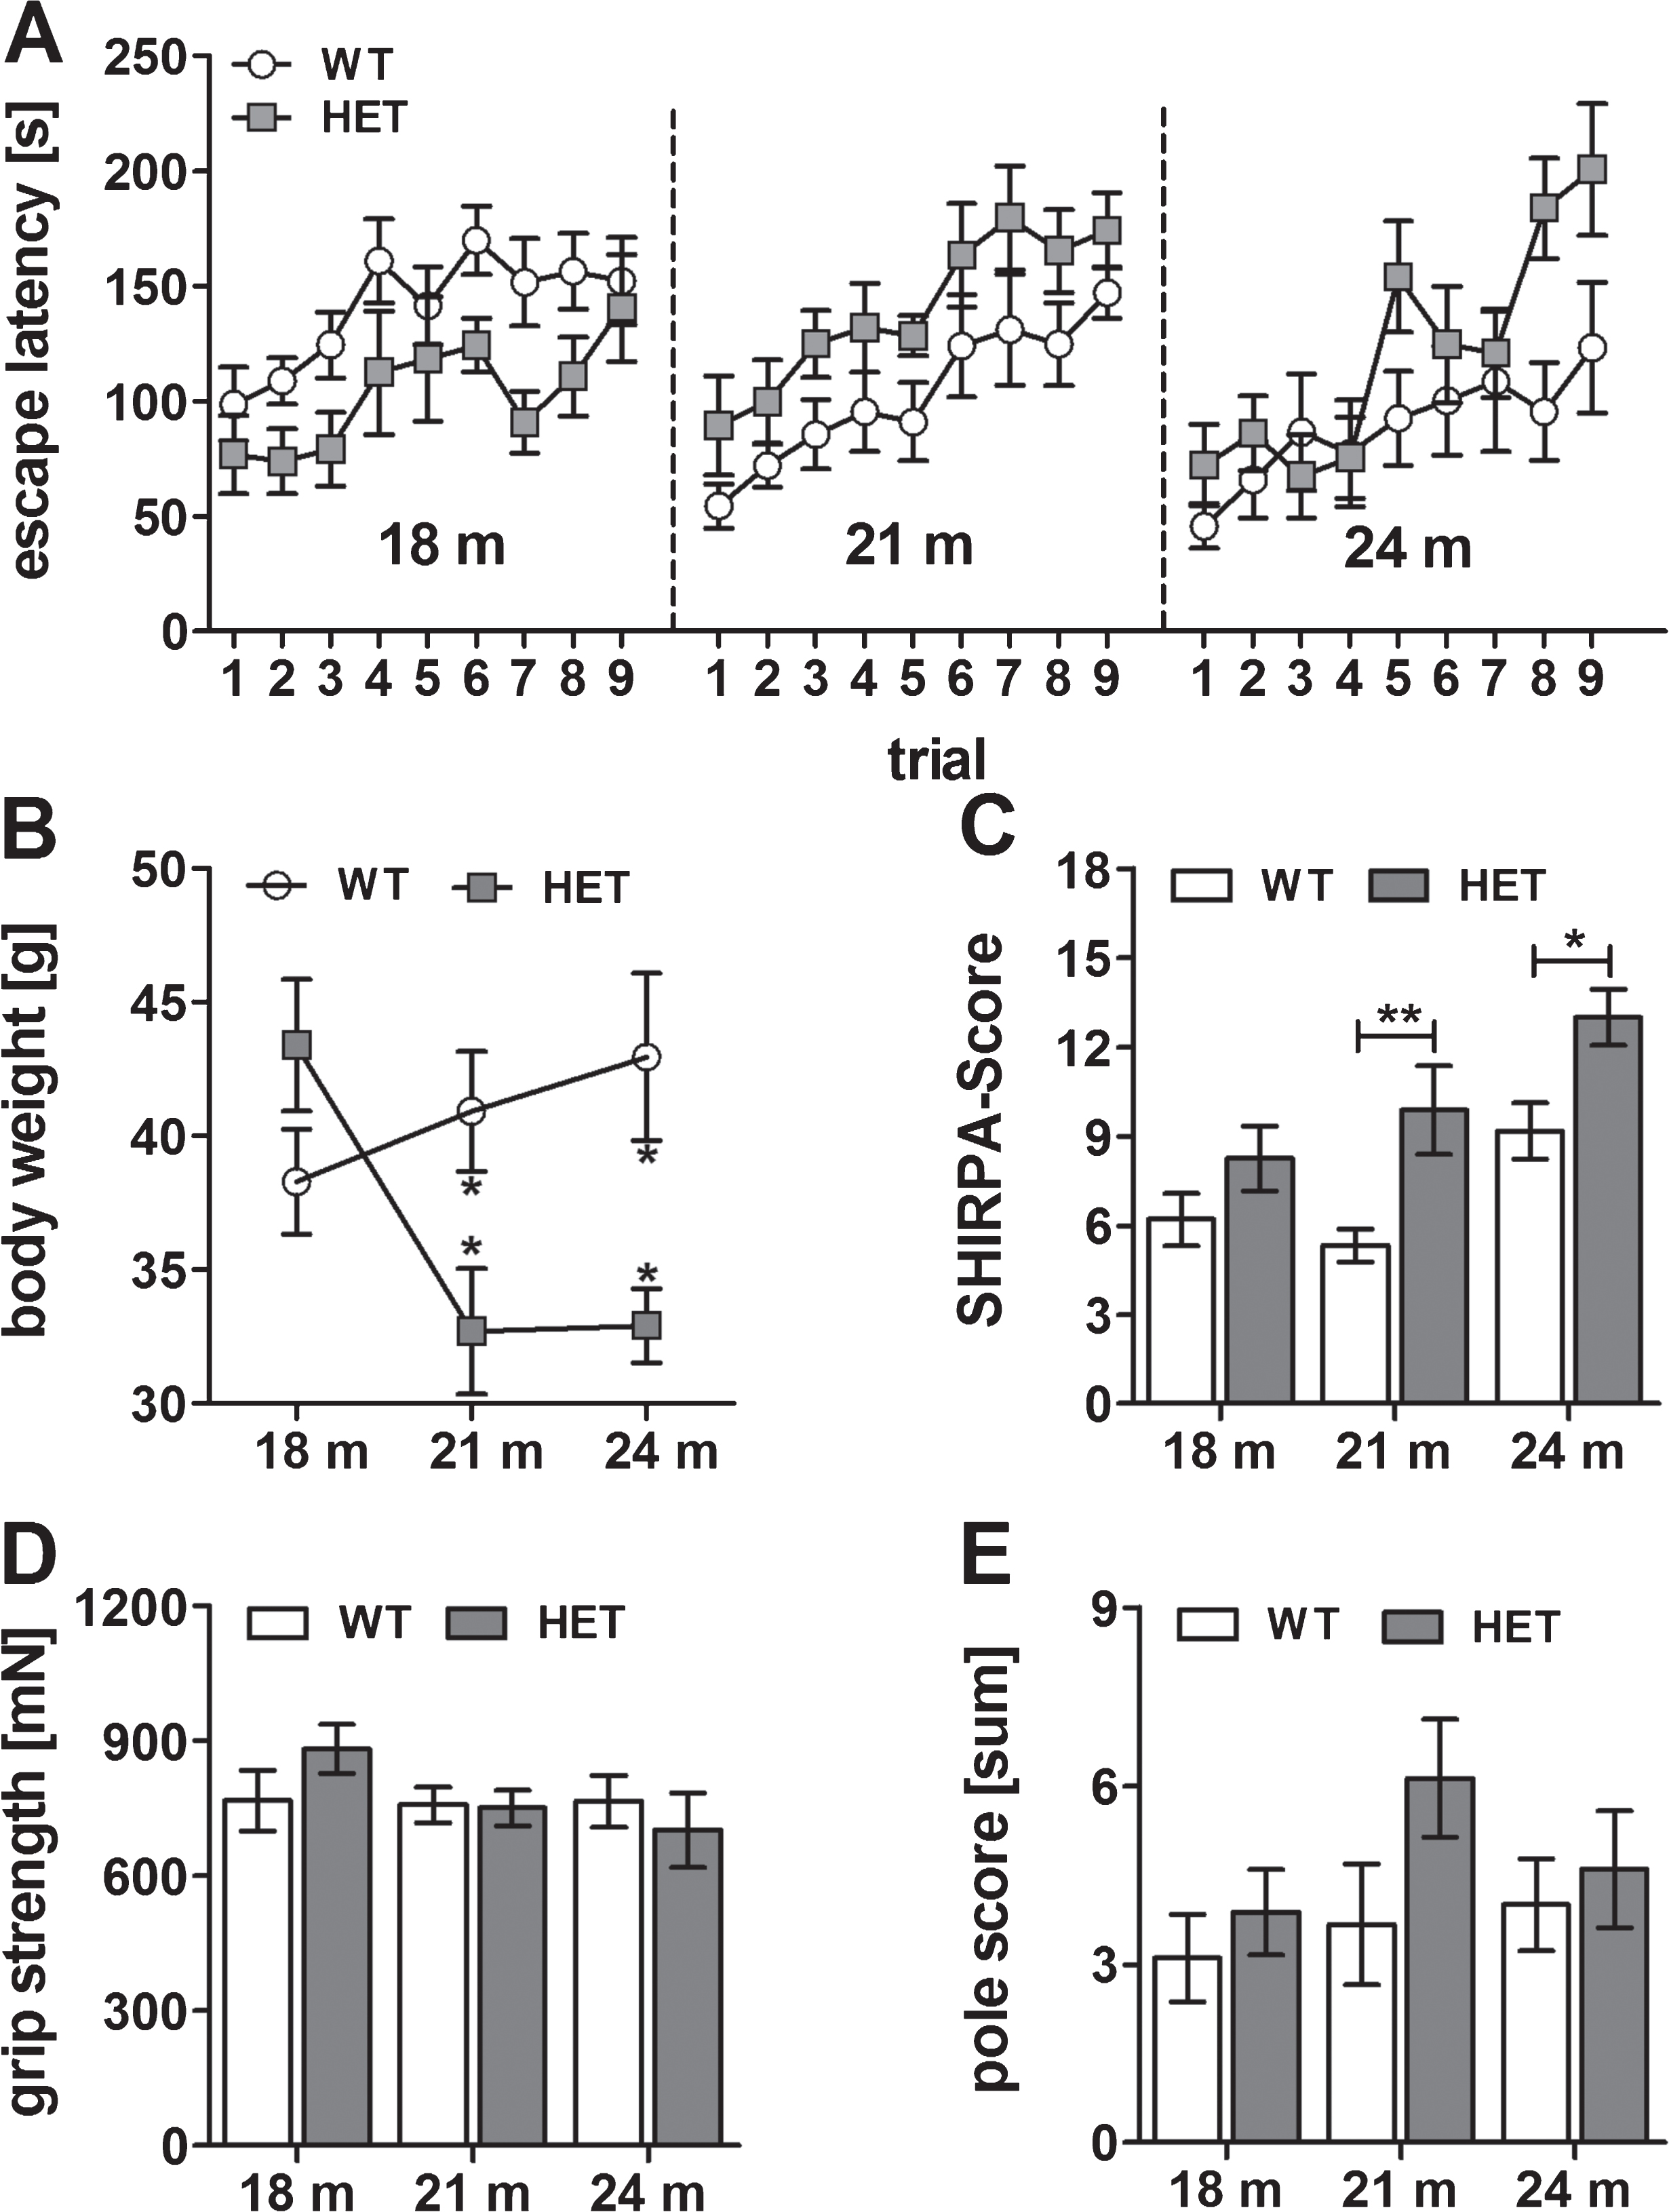 Motor behavior of wild type (WT) and heterozygous (HET) mice at 18, 21, and 24 months of age. Rotarod performance was equal among WT and HET at all ages (A). Phenotype assessment using SHIRPA test battery showed a minor motor phenotype in heterozygous mice at 21 and 24 months of age (C) while the body weight was also reduced at the same age (B). The grip strength (D) and performance in the pole test (E) were not impaired at any age. Data is represented as mean±SEM and *p < 0.05.